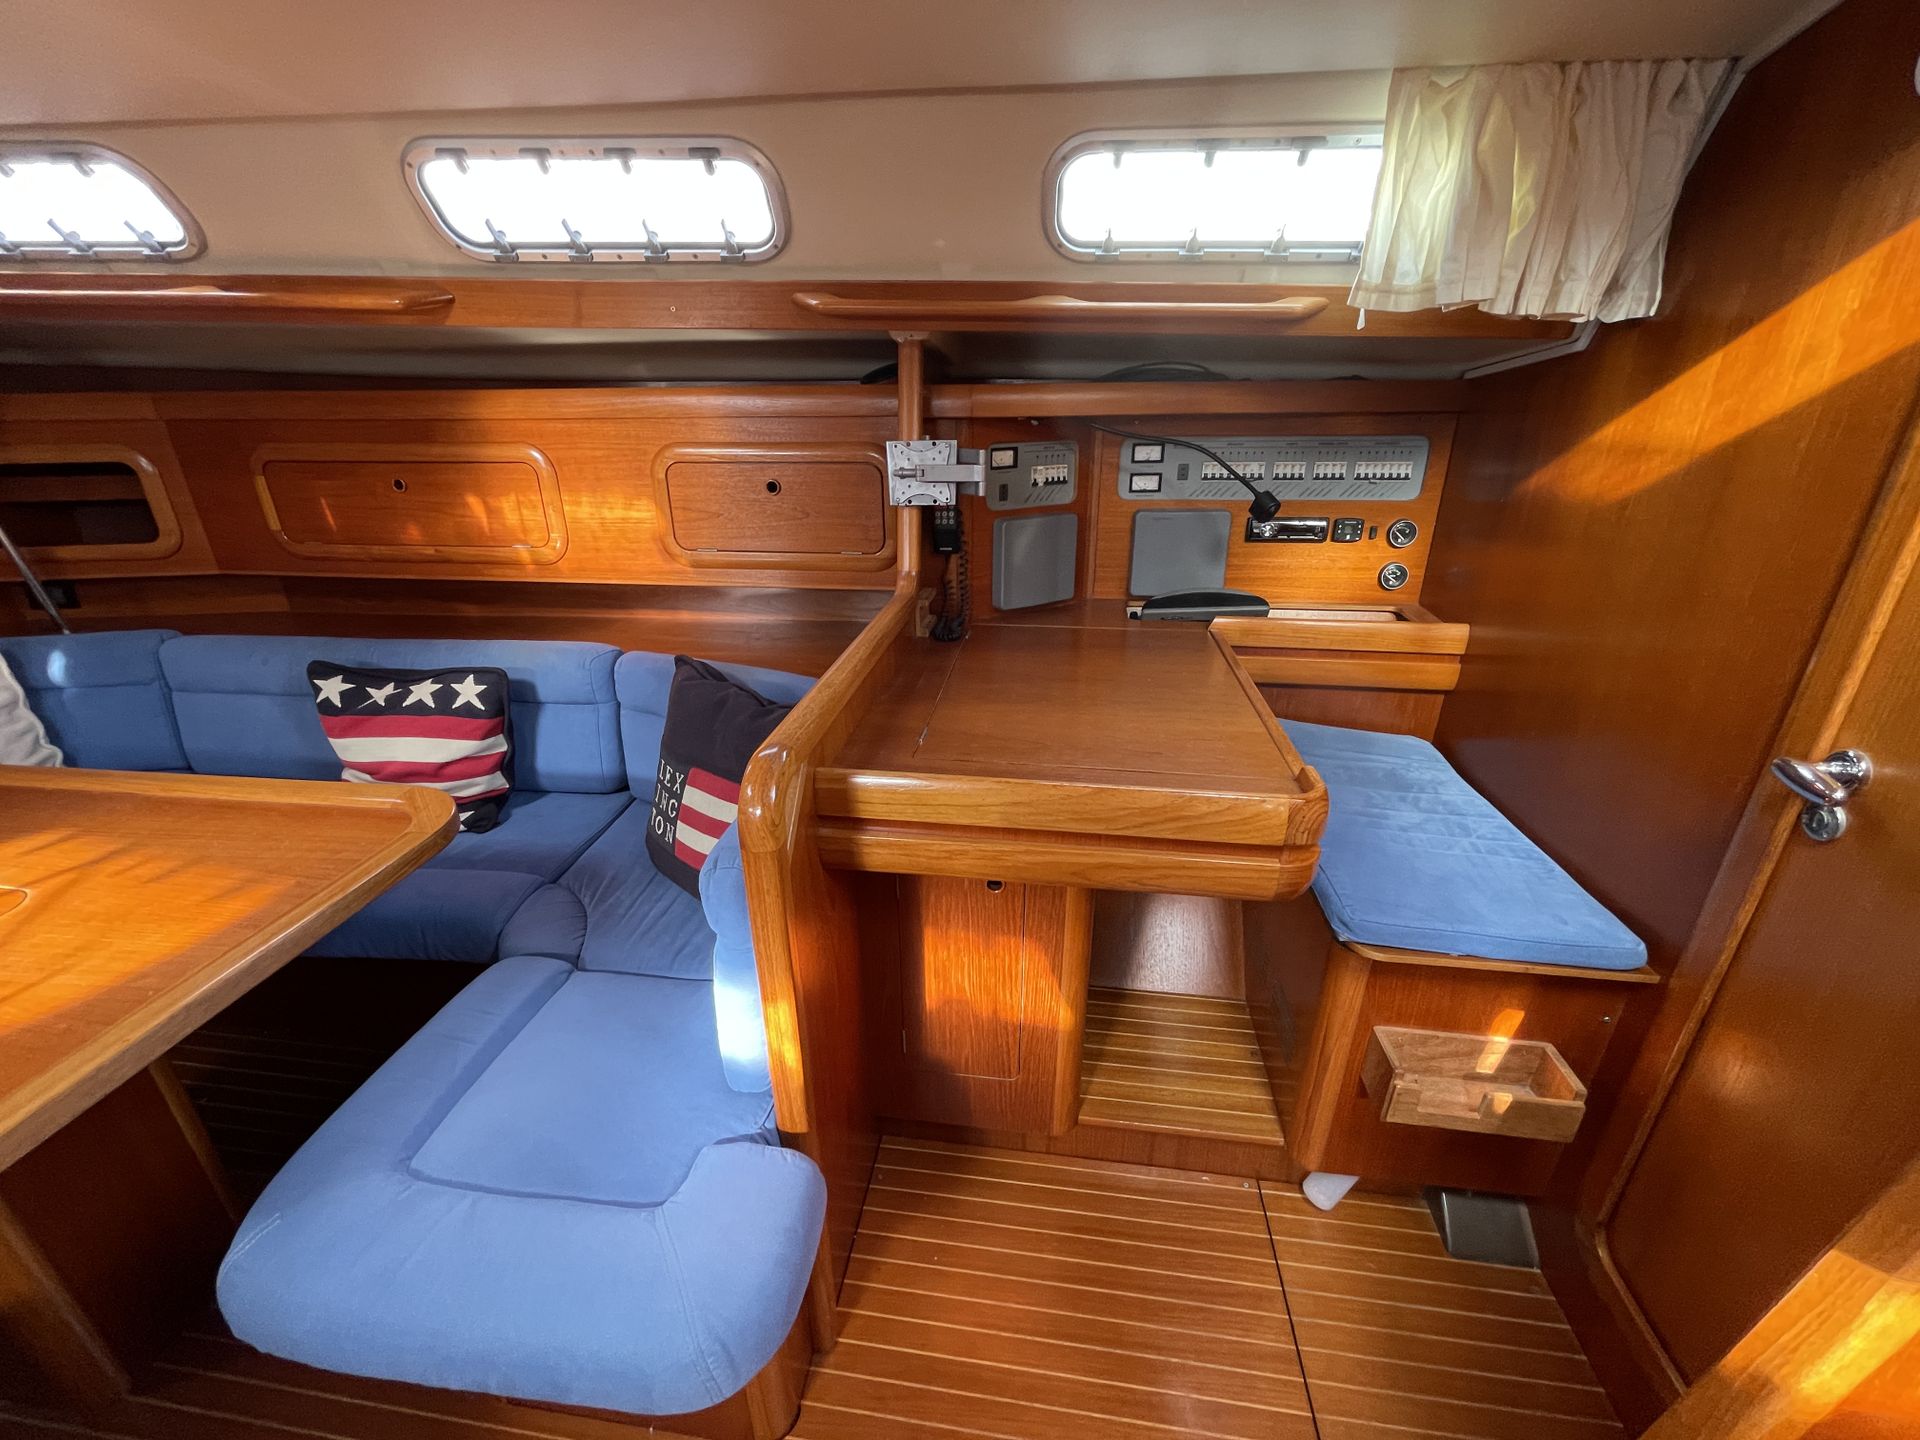 Grand Soleil 46.3 - 3 cabins - 2 owners and renovated teak deck #45